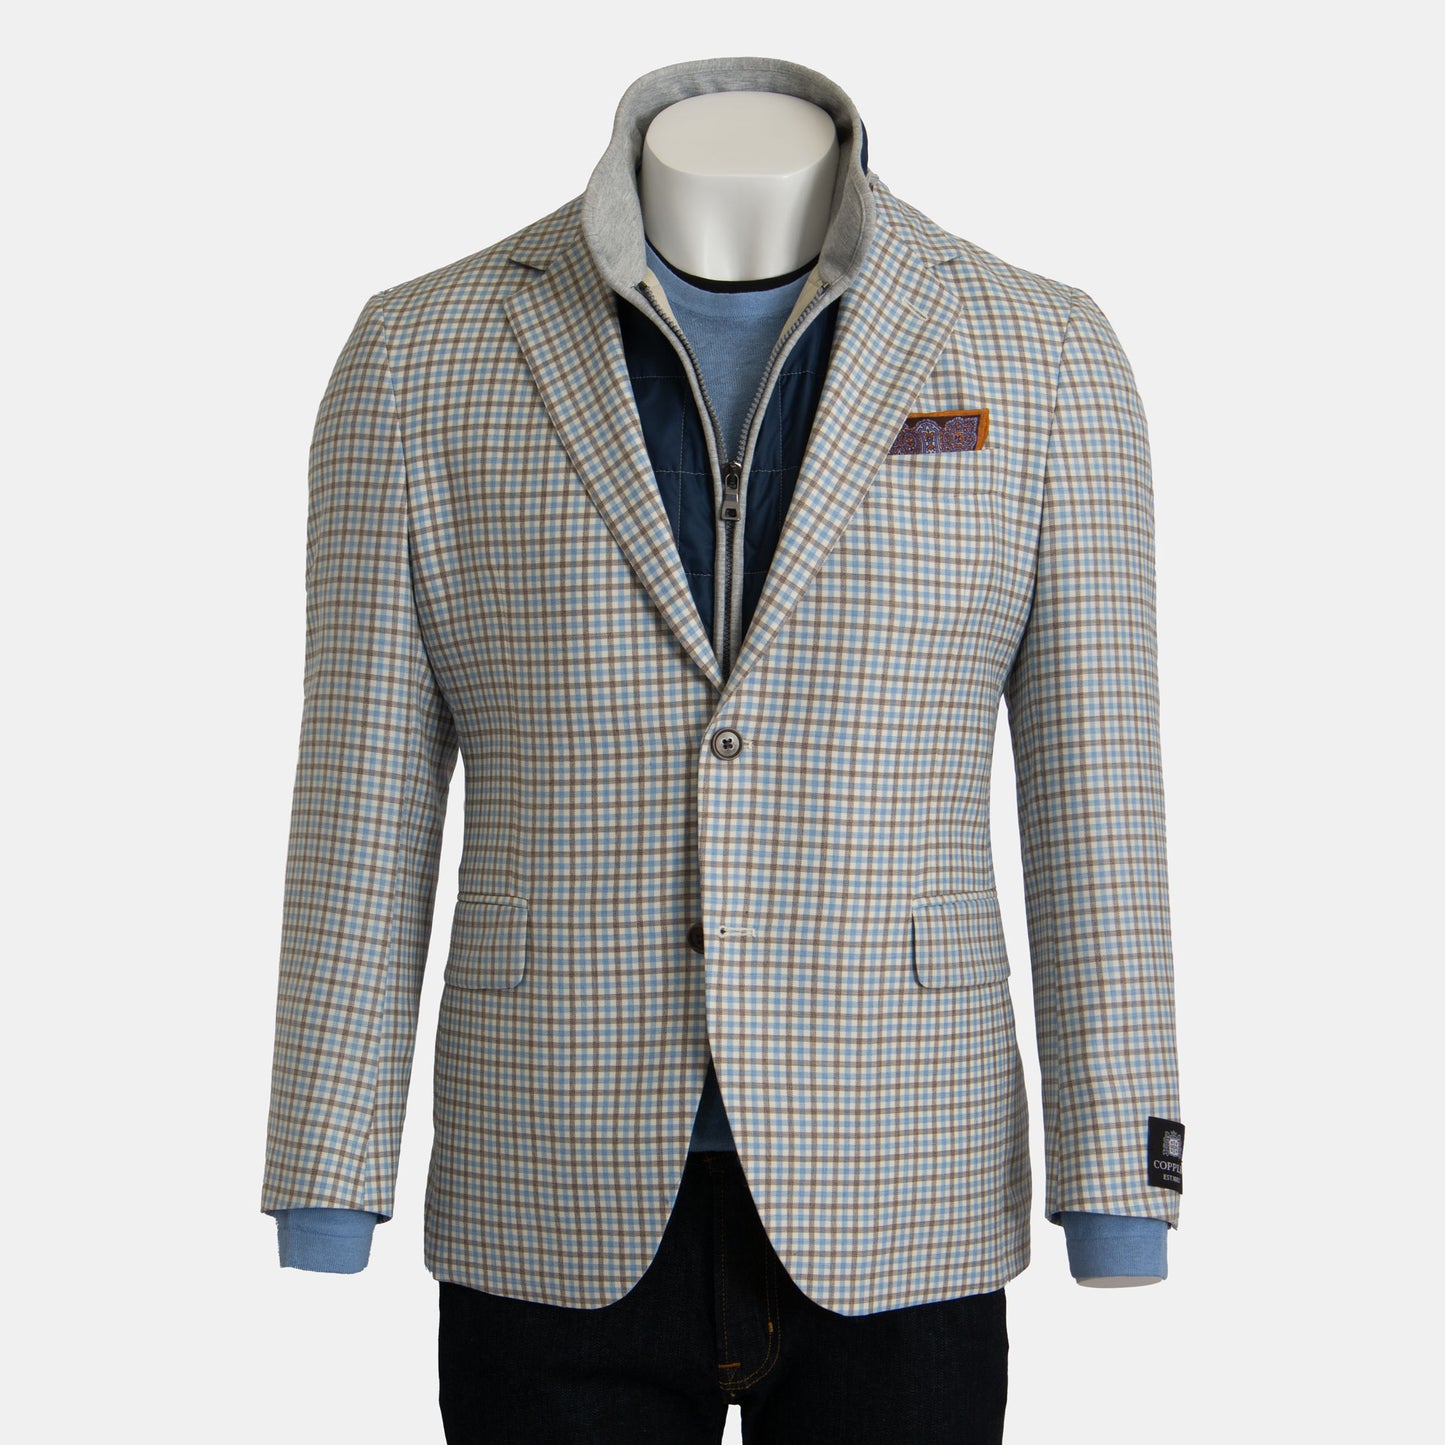 Khaki's of Carmel - Coppley Plaid Check Sport Coat in White, Brown, and Blue